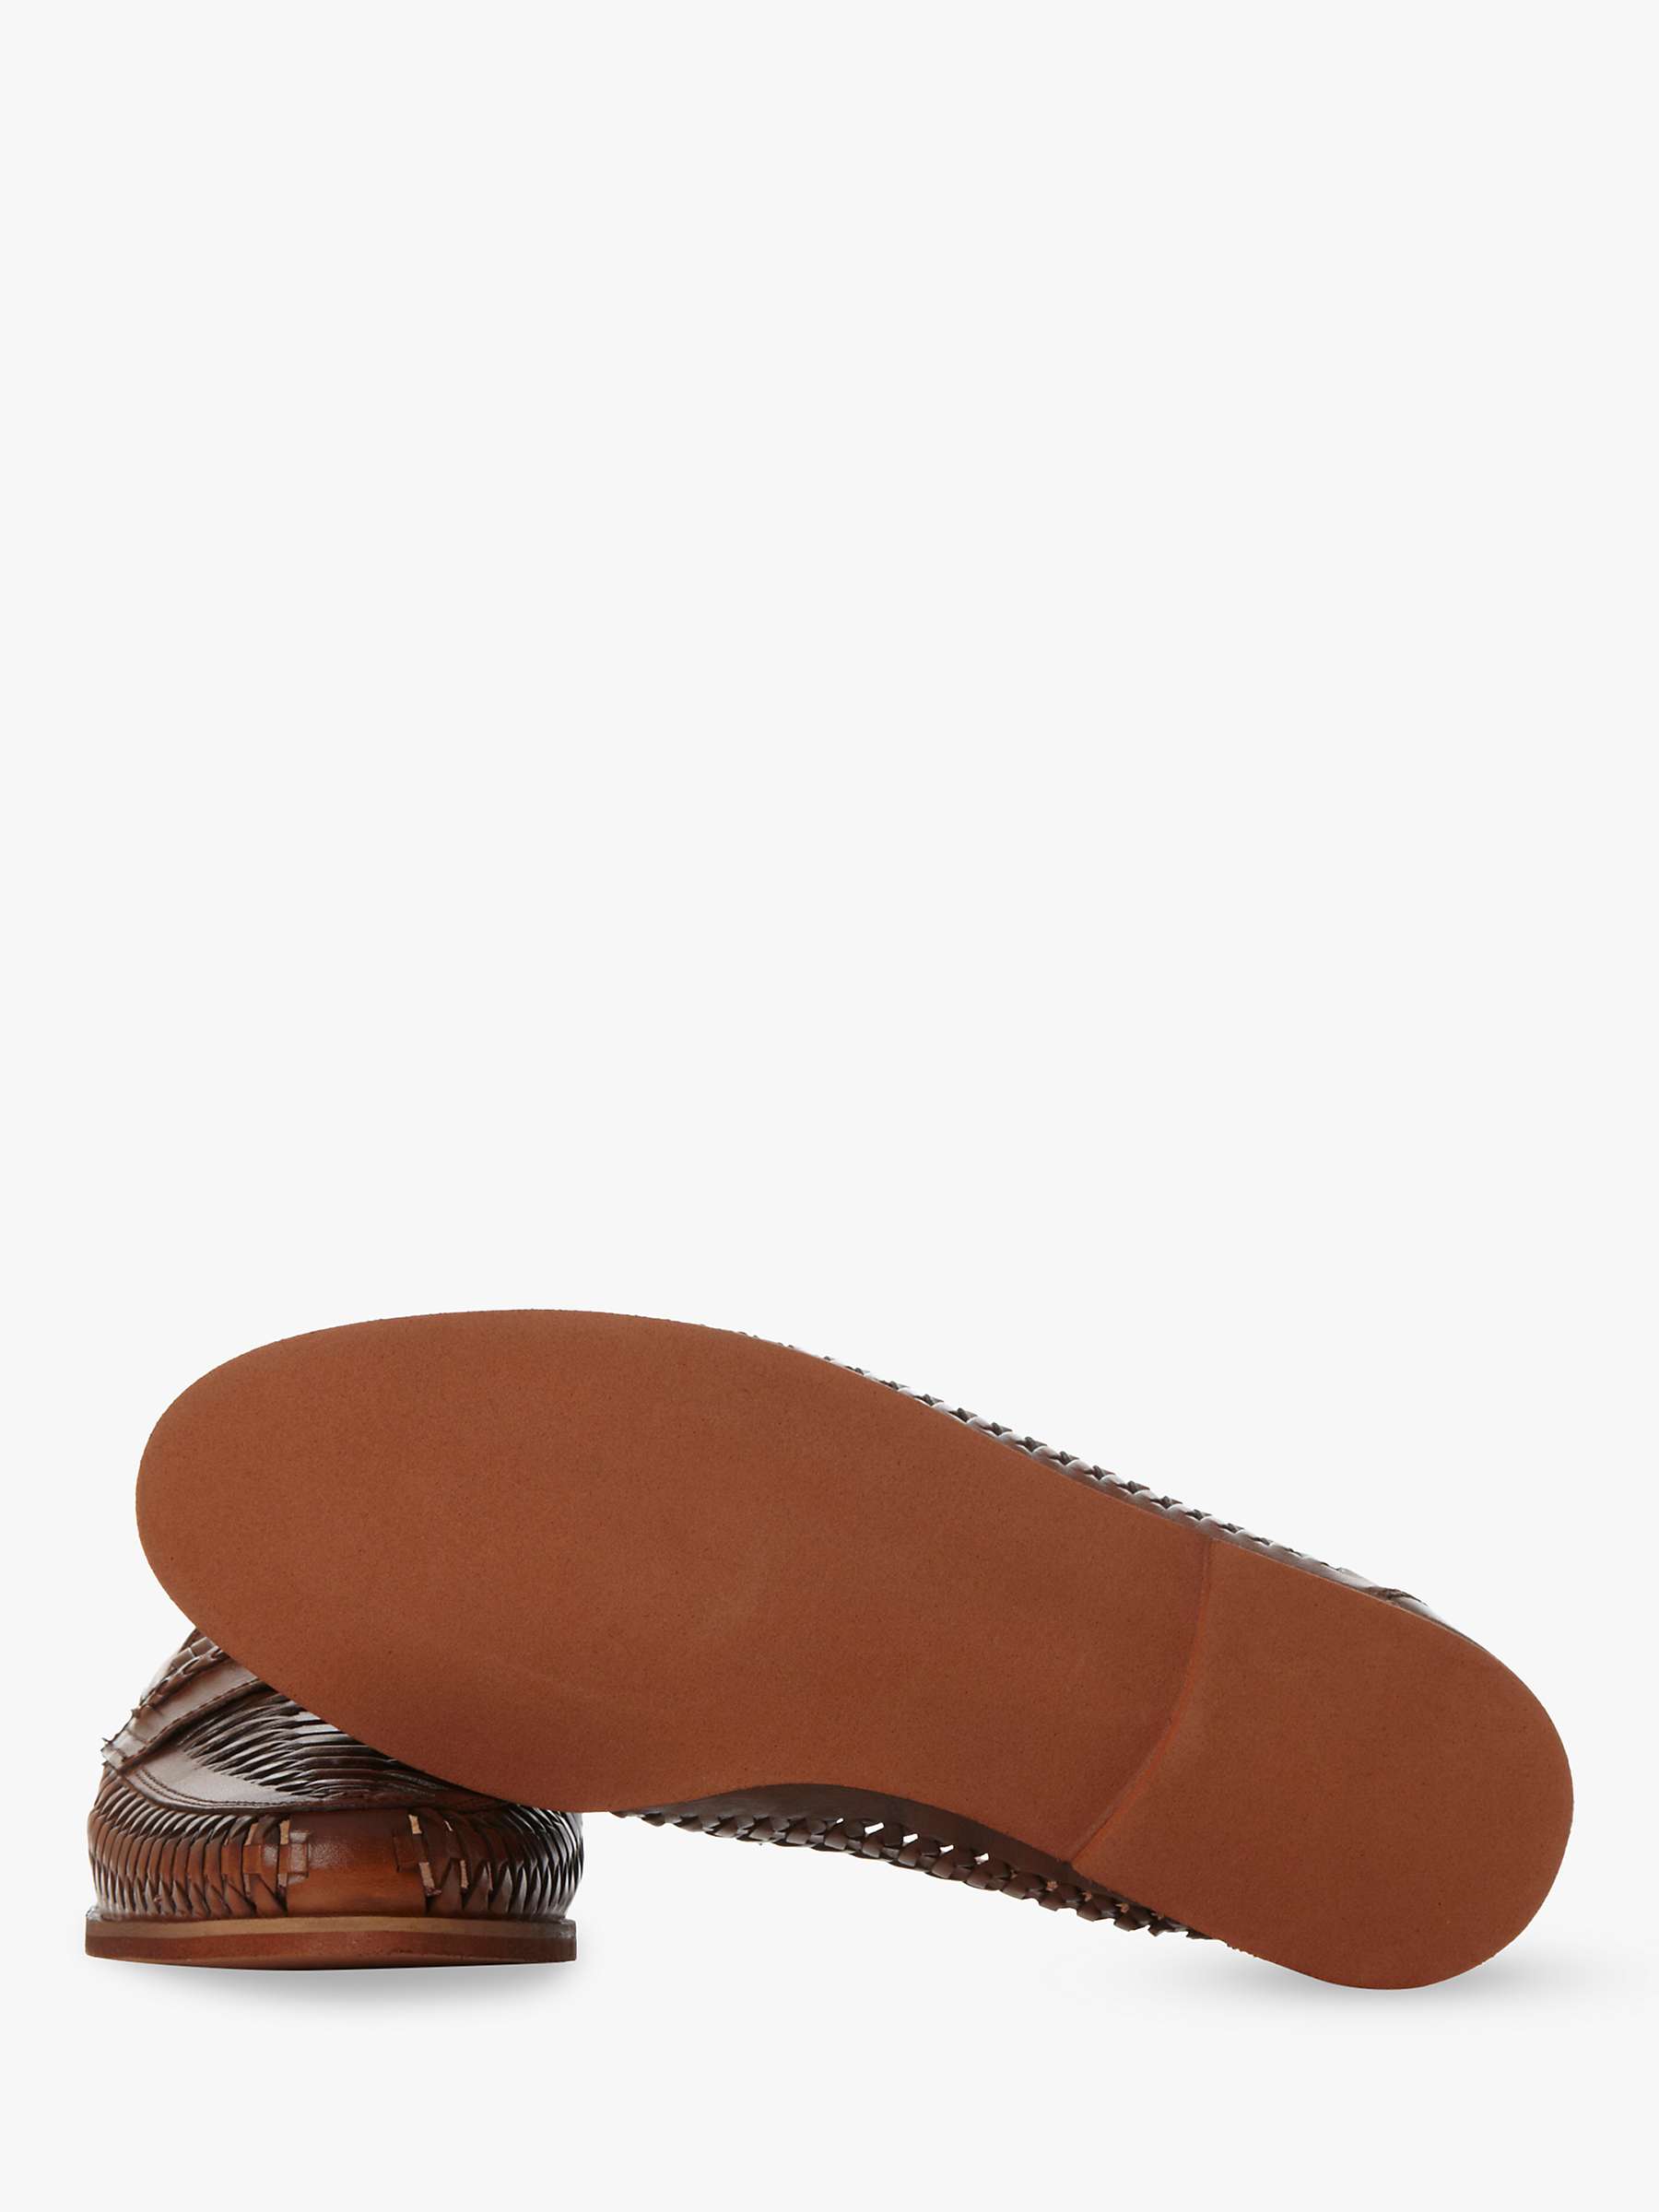 Buy Dune Brighton Rock Woven Leather Loafers Online at johnlewis.com